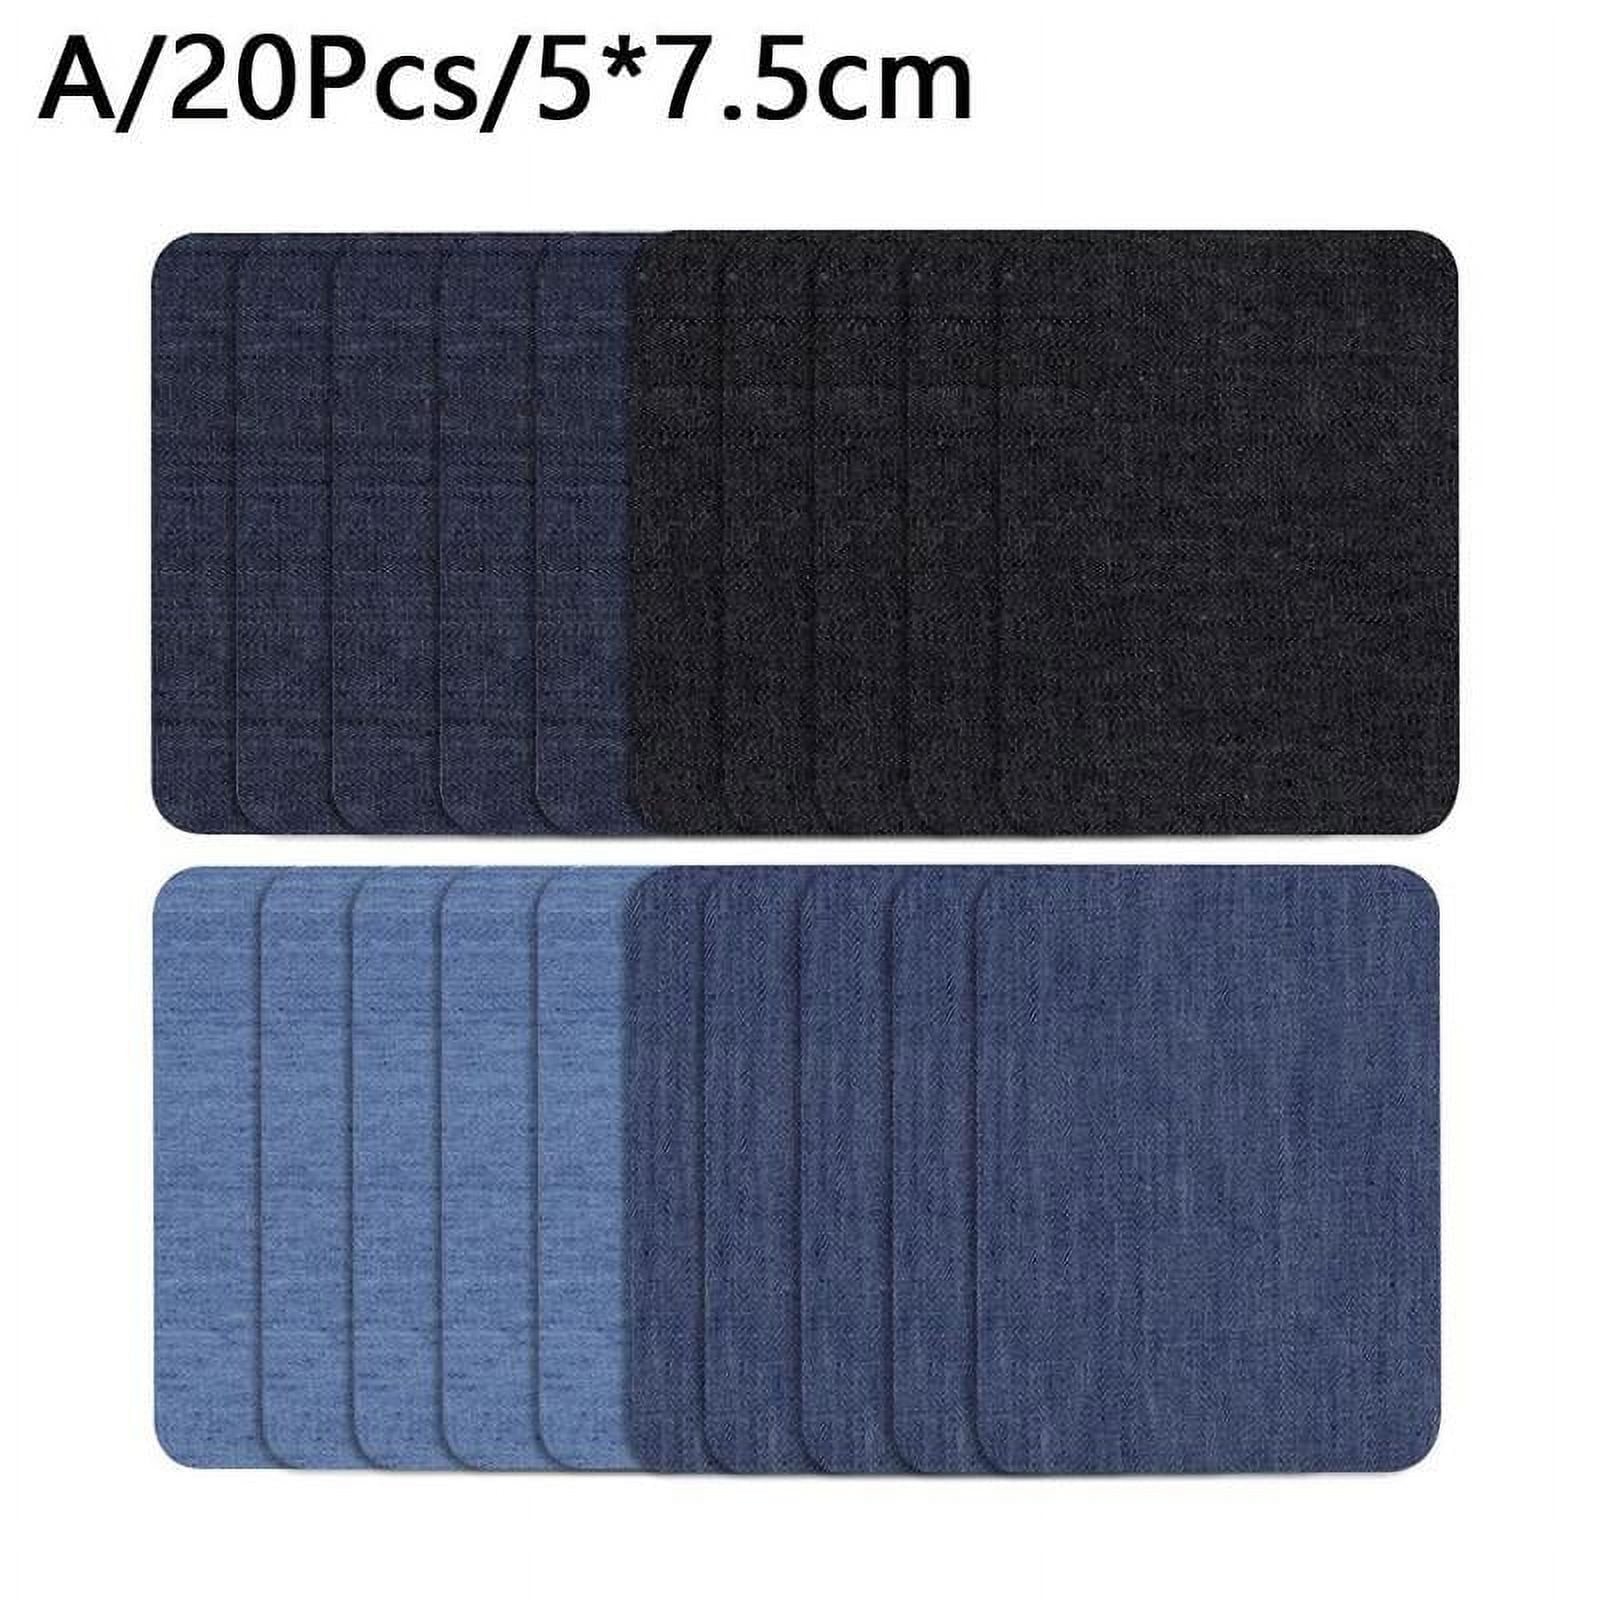 20 Pieces Jeans Denim Patches, Premium Quality Denim Iron-on Jean Patches,  4 Shades of Blue Iron On Pants Patches for Holes Clothing Repair Outside